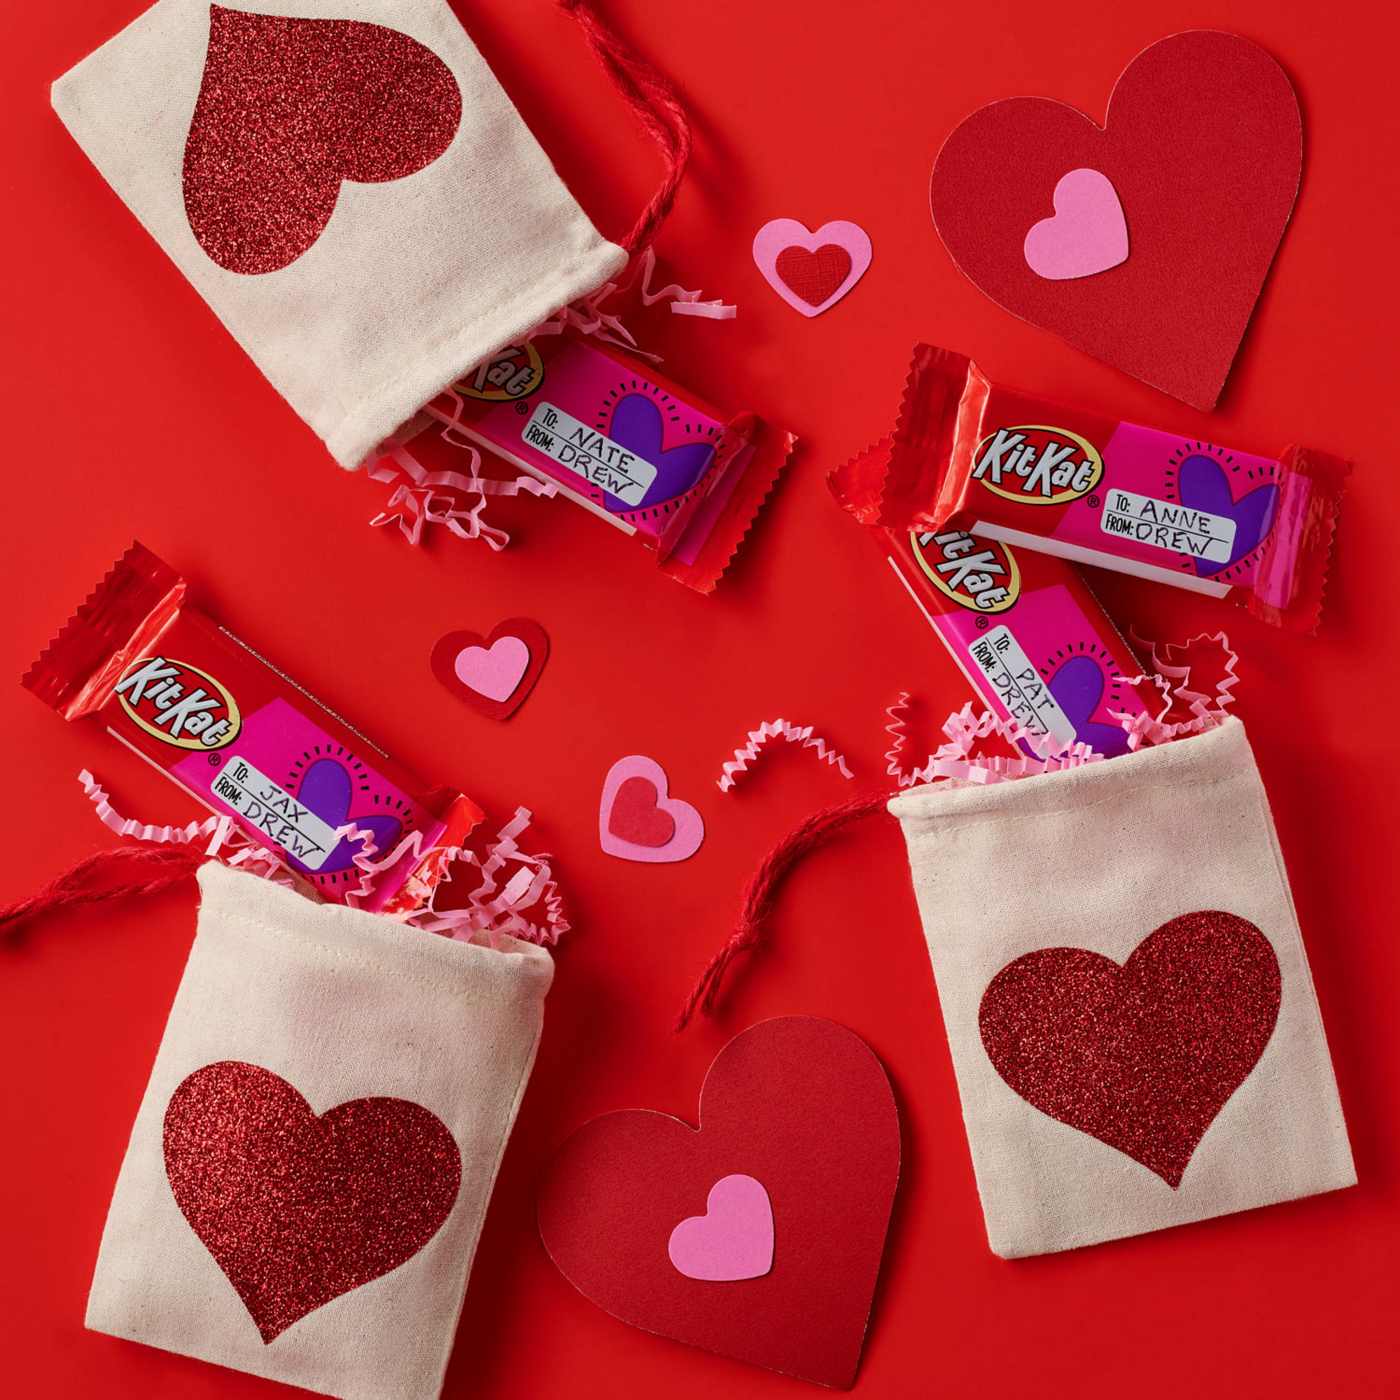 Kit Kat Milk Chocolate Snack Size Valentine Exchange Candy - Shop Candy at  H-E-B